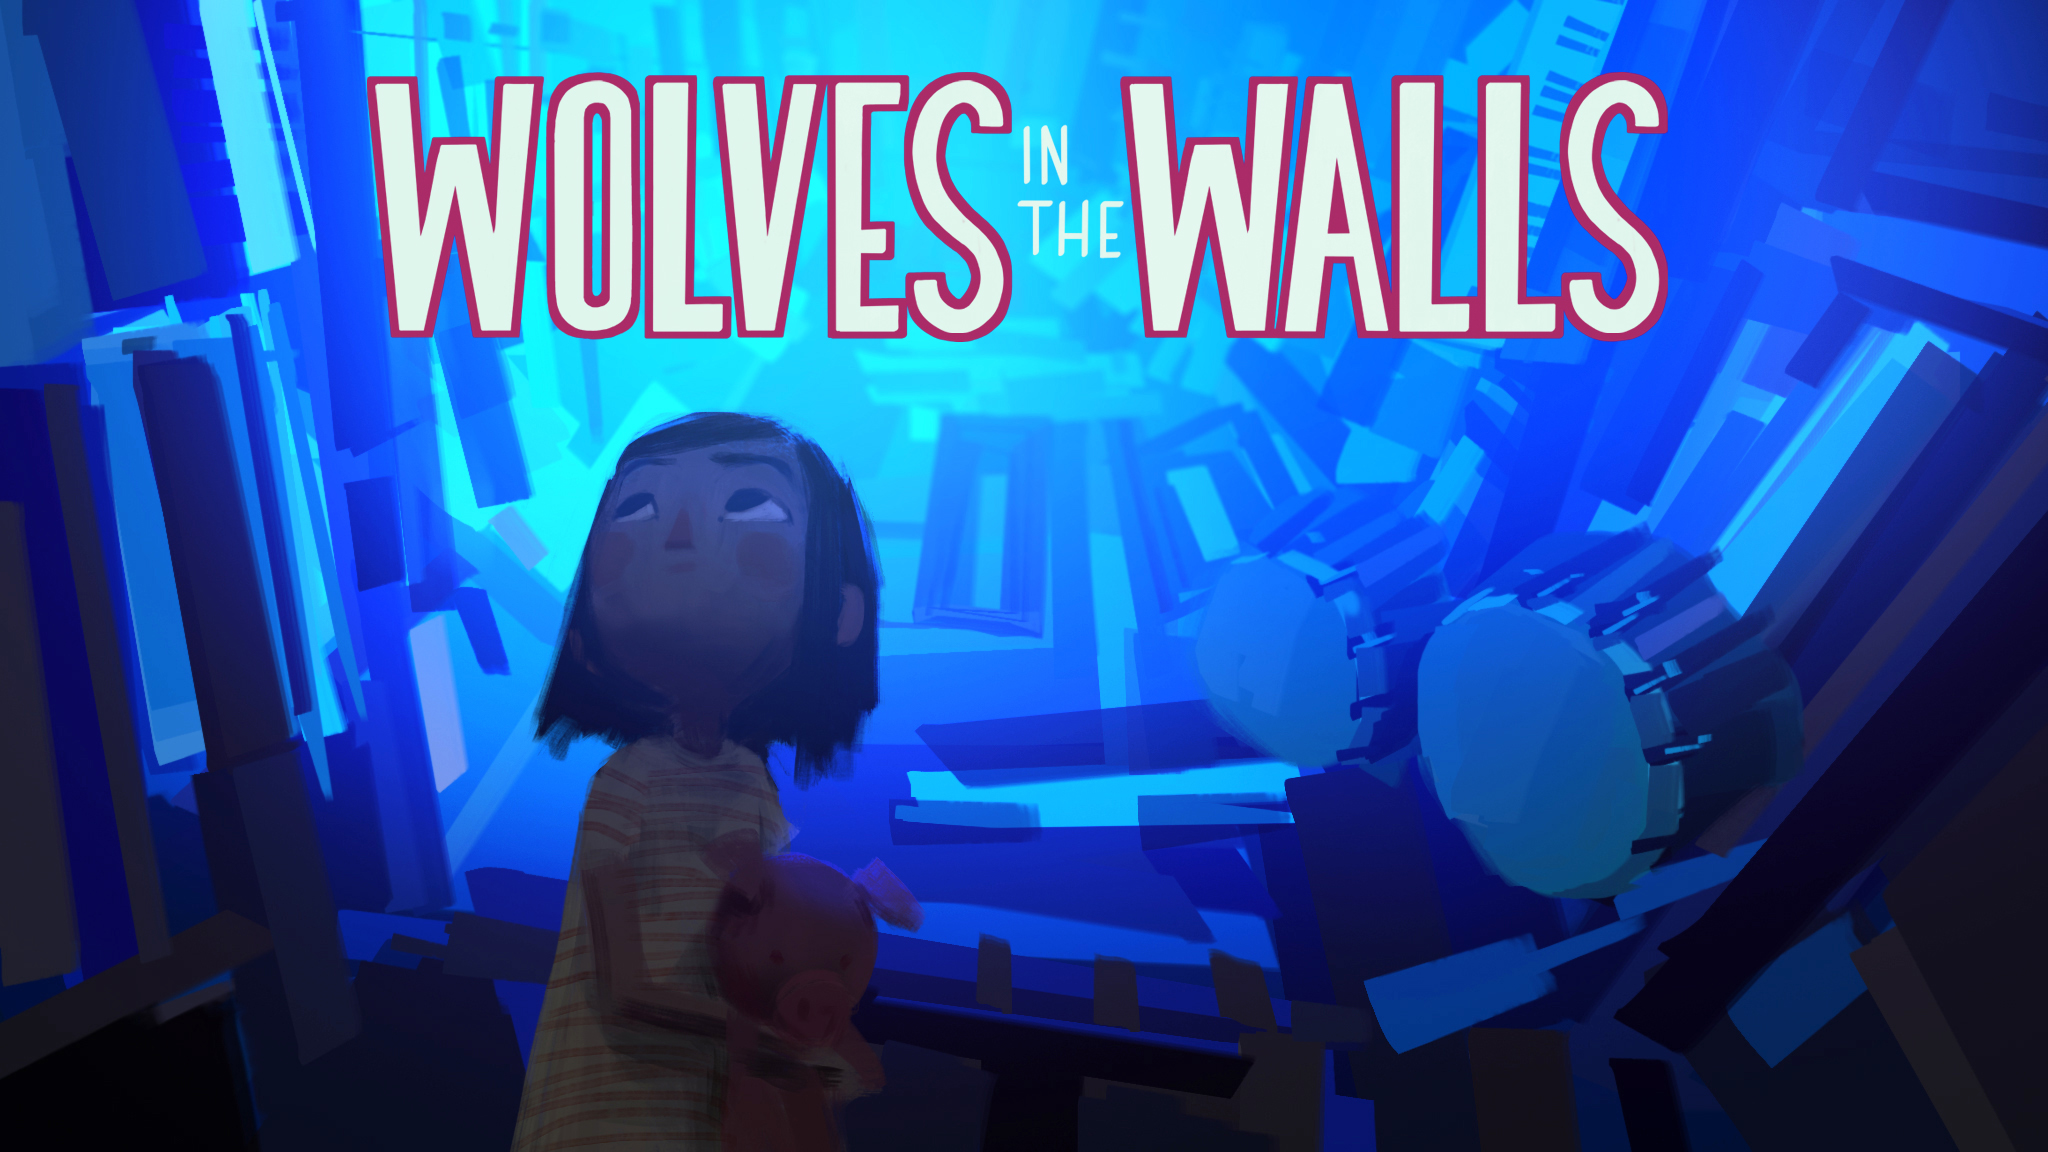 The Of Wolves In Walls Arrives On Oculus Headsets - VRScout